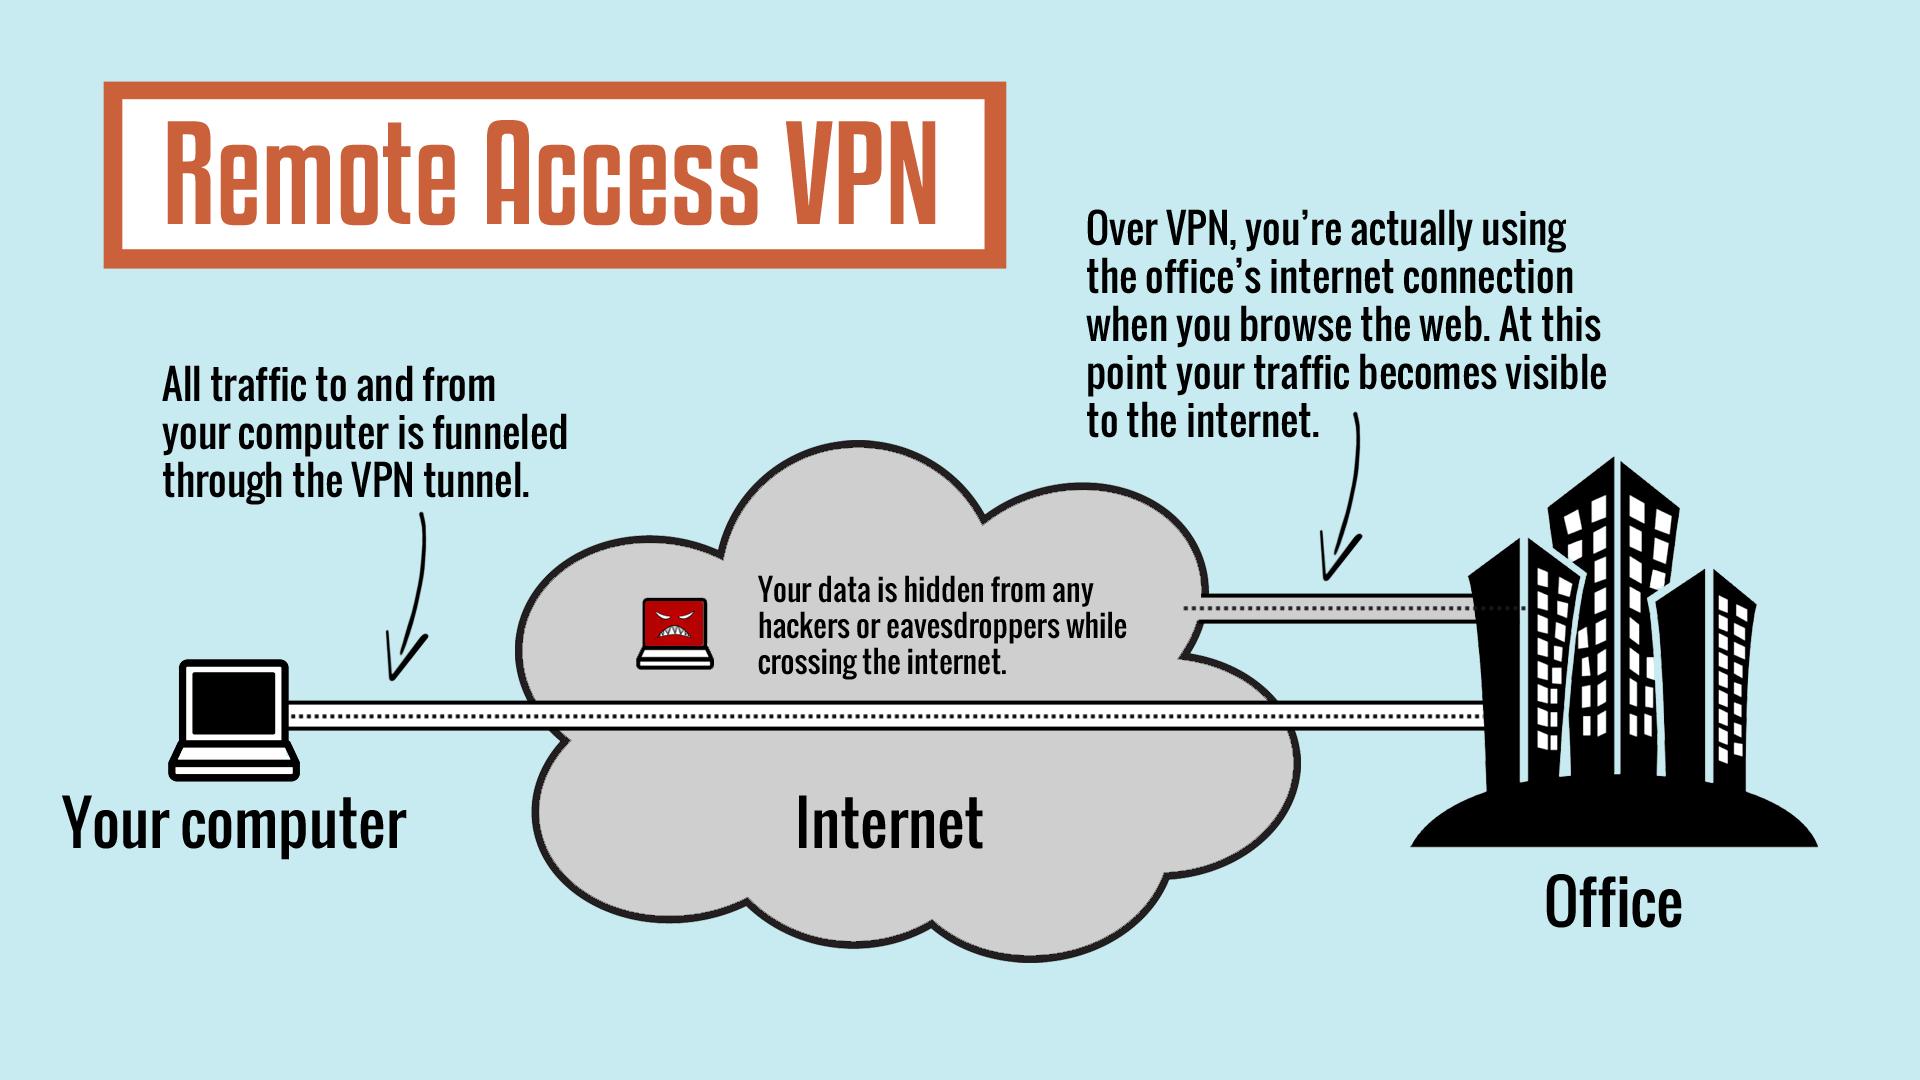 connect two home networks via vpn china